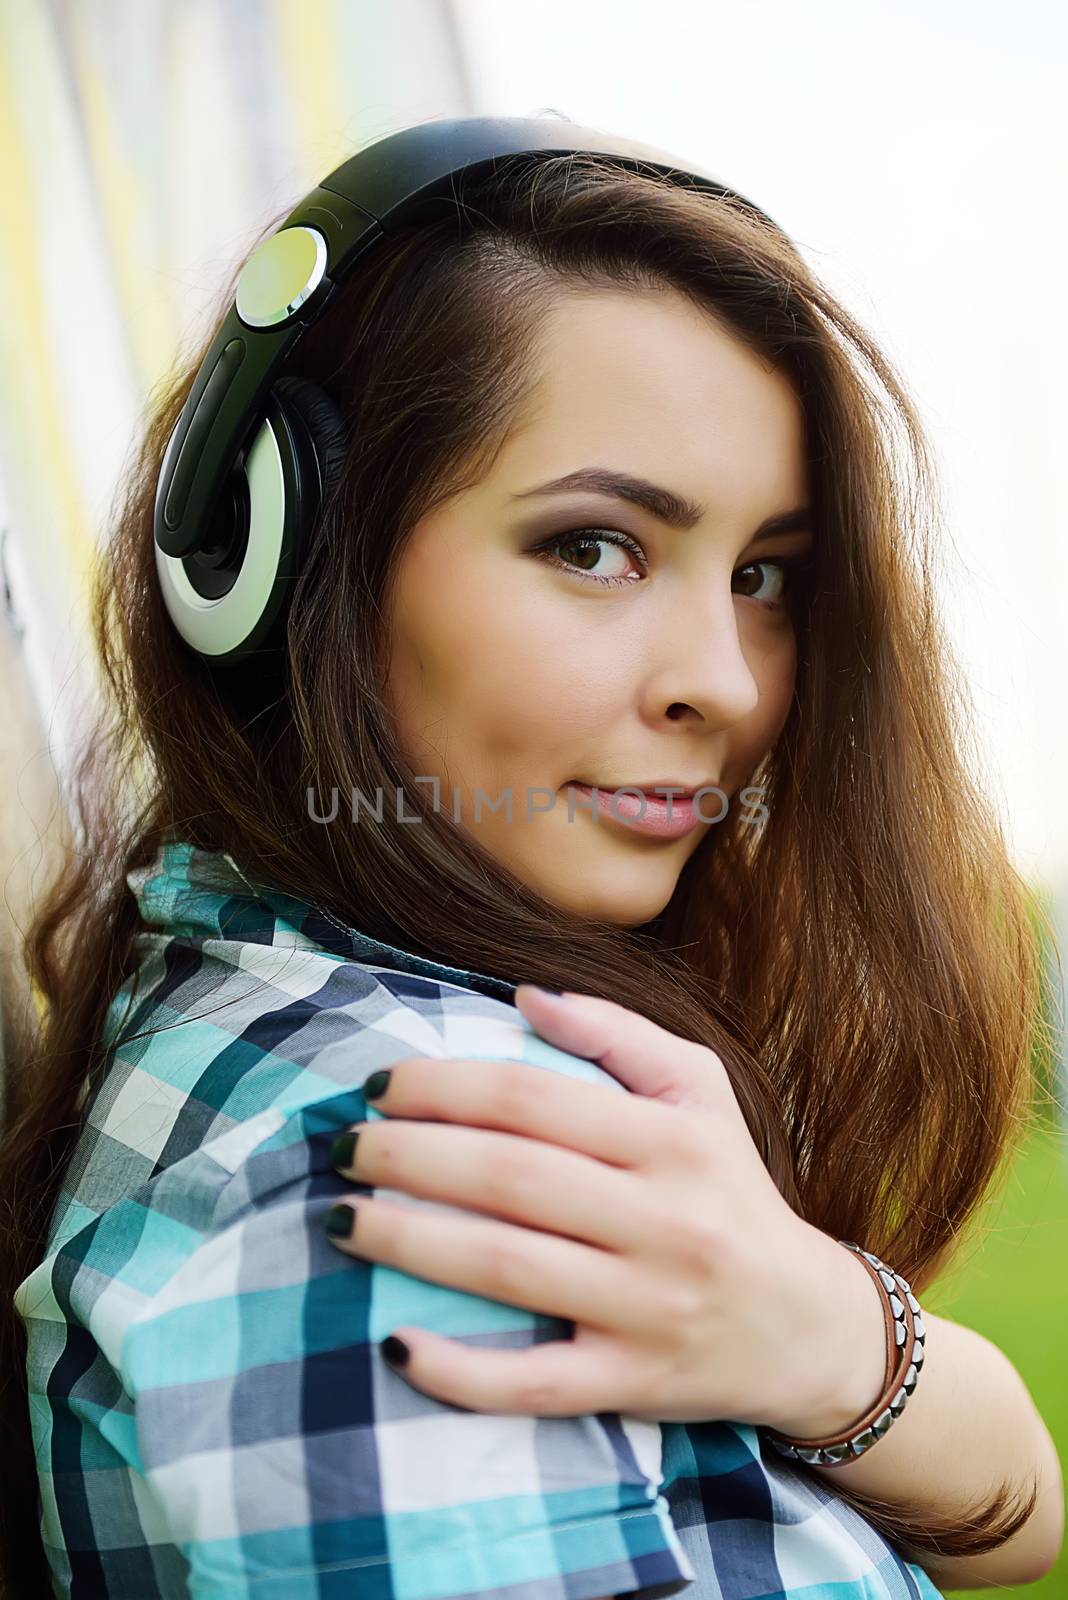  Headphones.Portrait of young woman sitting at graffiti wall